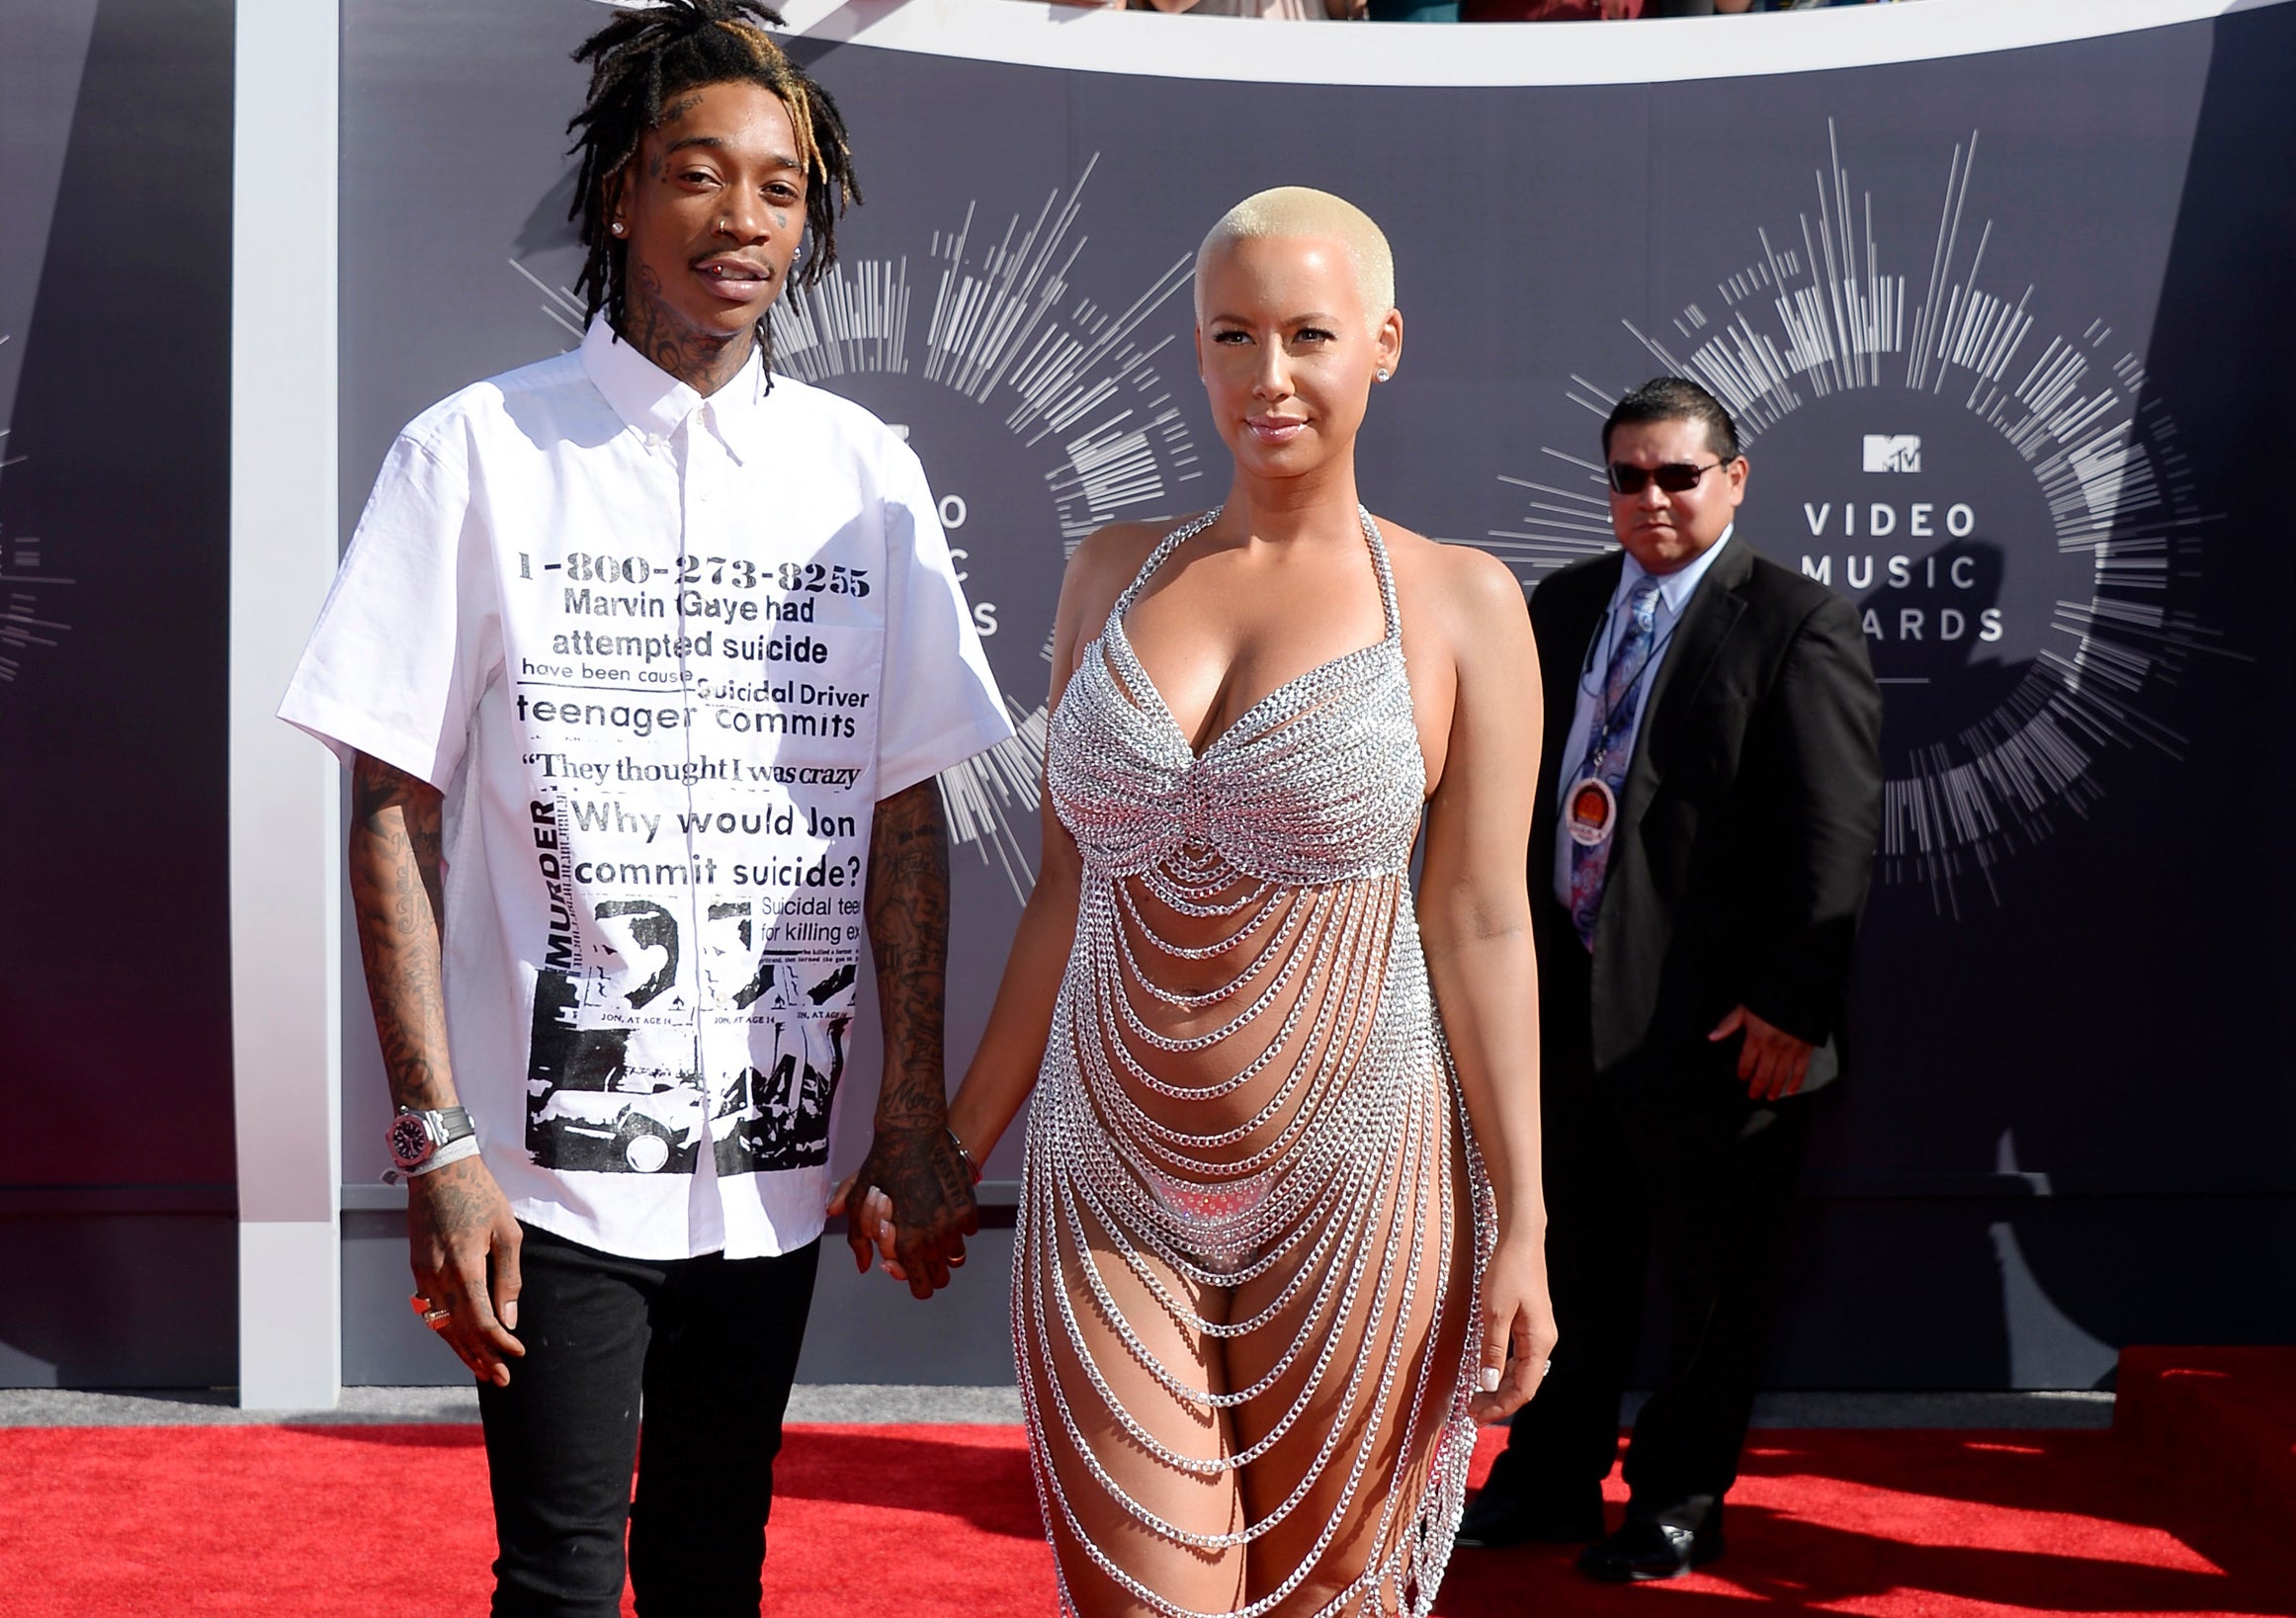 Amber Rose emulated Rose McGowan in a silver chain dress at yesterday's VMAs